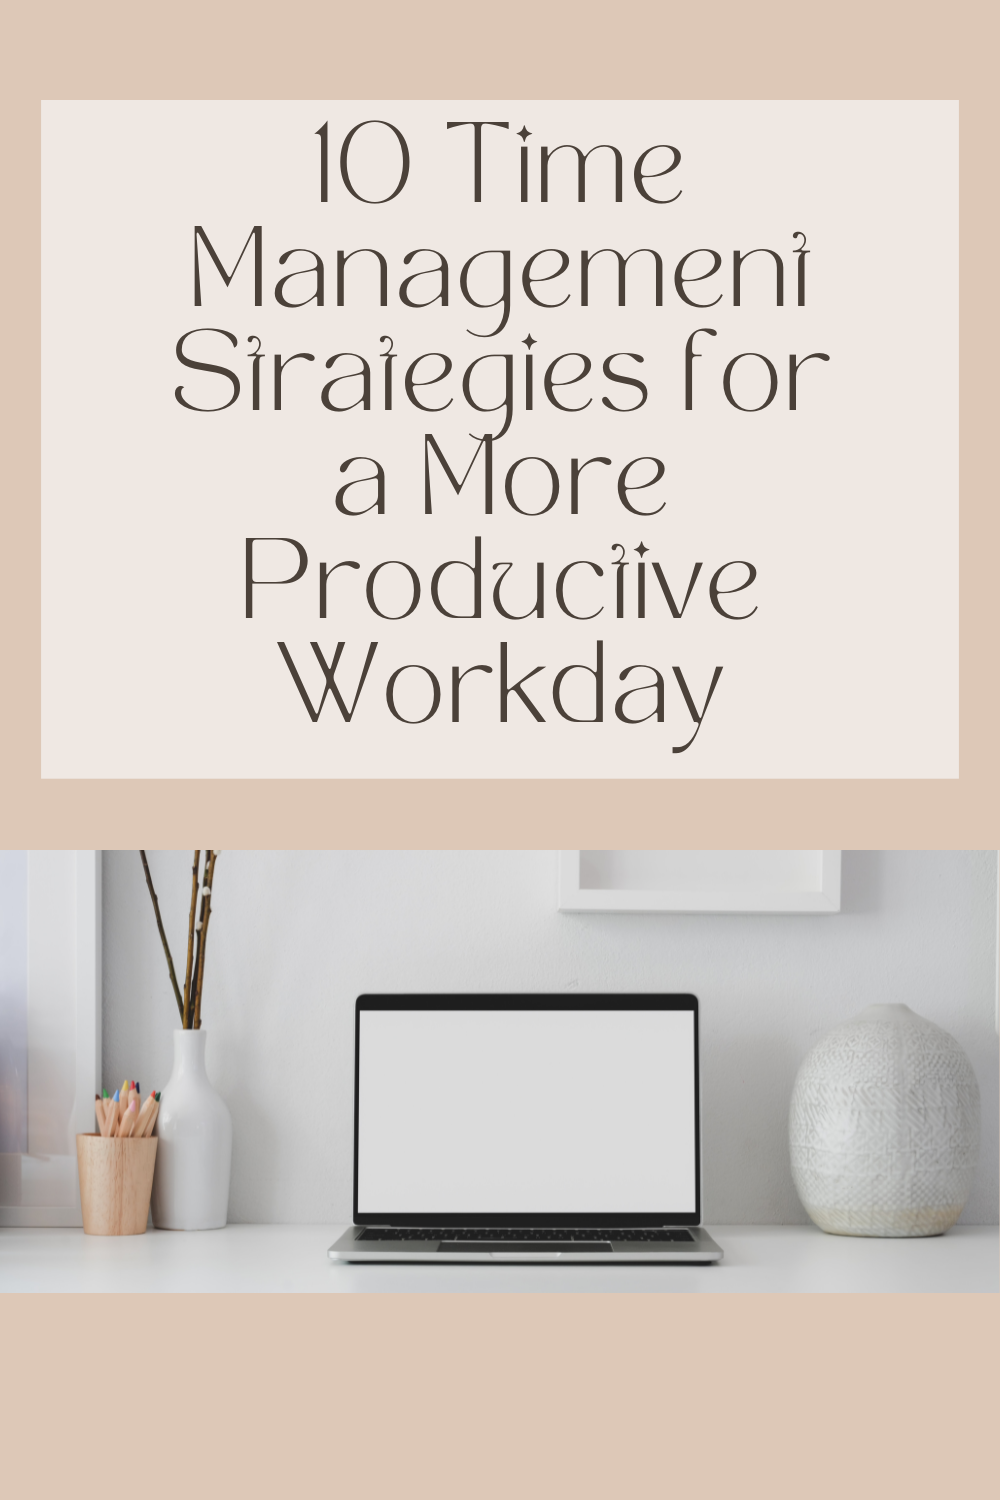 10 Time Management Strategies for a More Productive Workday